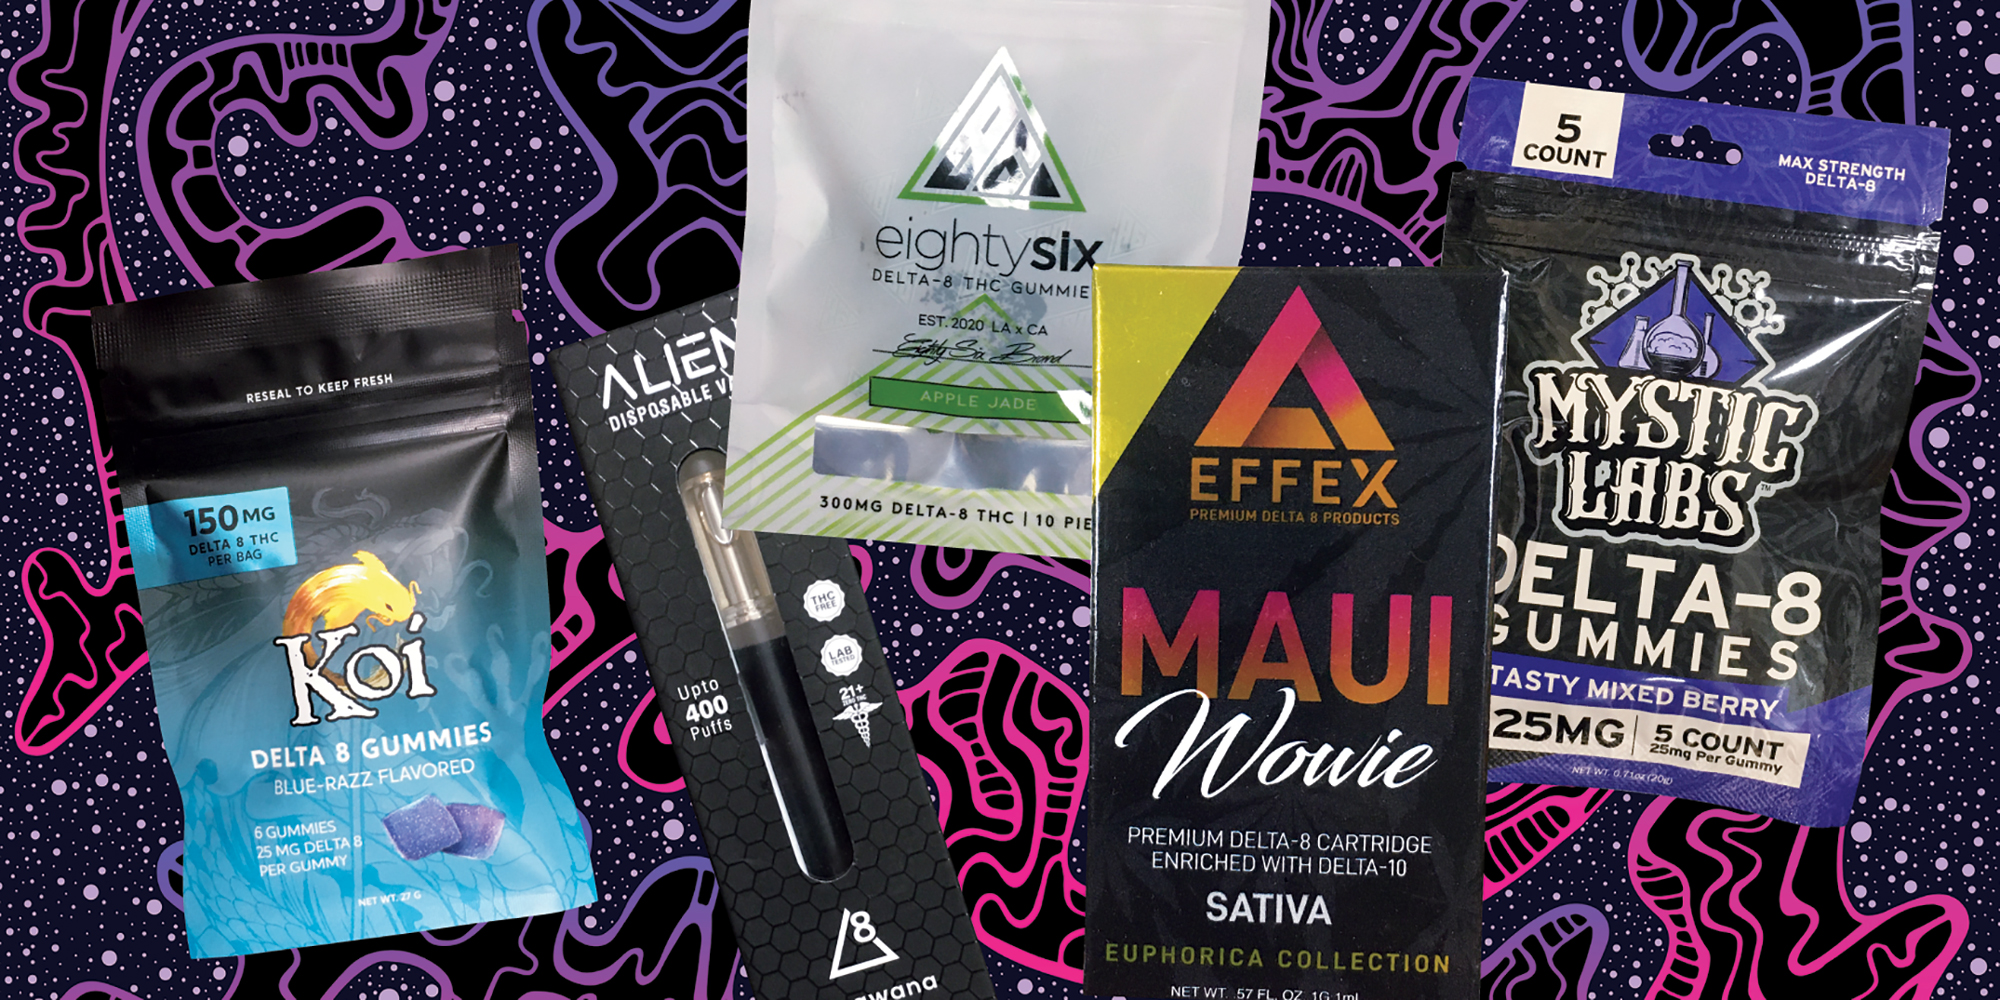 Delta 8 Wax - Products|Thc|Hemp|Brand|Gummies|Product|Delta-8|Cbd|Origin|Cannabis|Delta|Users|Effects|Cartridges|Brands|Range|List|Research|Usasource|Options|Benefits|Plant|Companies|Vape|Source|Results|Gummy|People|Space|High-Quality|Quality|Place|Overview|Flowers|Lab|Drug|Cannabinoids|Tinctures|Overviewproducts|Cartridge|Delta-8 Thc|Delta-8 Products|Delta-9 Thc|Delta-8 Brands|Usa Source|Delta-8 Thc Products|Cannabis Plant|Federal Level|United States|Delta-8 Gummies|Delta-8 Space|Health Canada|Delta Products|Delta-8 Thc Gummies|Delta-8 Companies|Vape Cartridges|Similar Benefits|Hemp Doctor|Brand Overviewproducts|Drug Test|High-Quality Products|Organic Hemp|San Jose|Editorial Team|Farm Bill|Overview Products|Wide Range|Psychoactive Properties|Reliable Provider|Boston Hempire